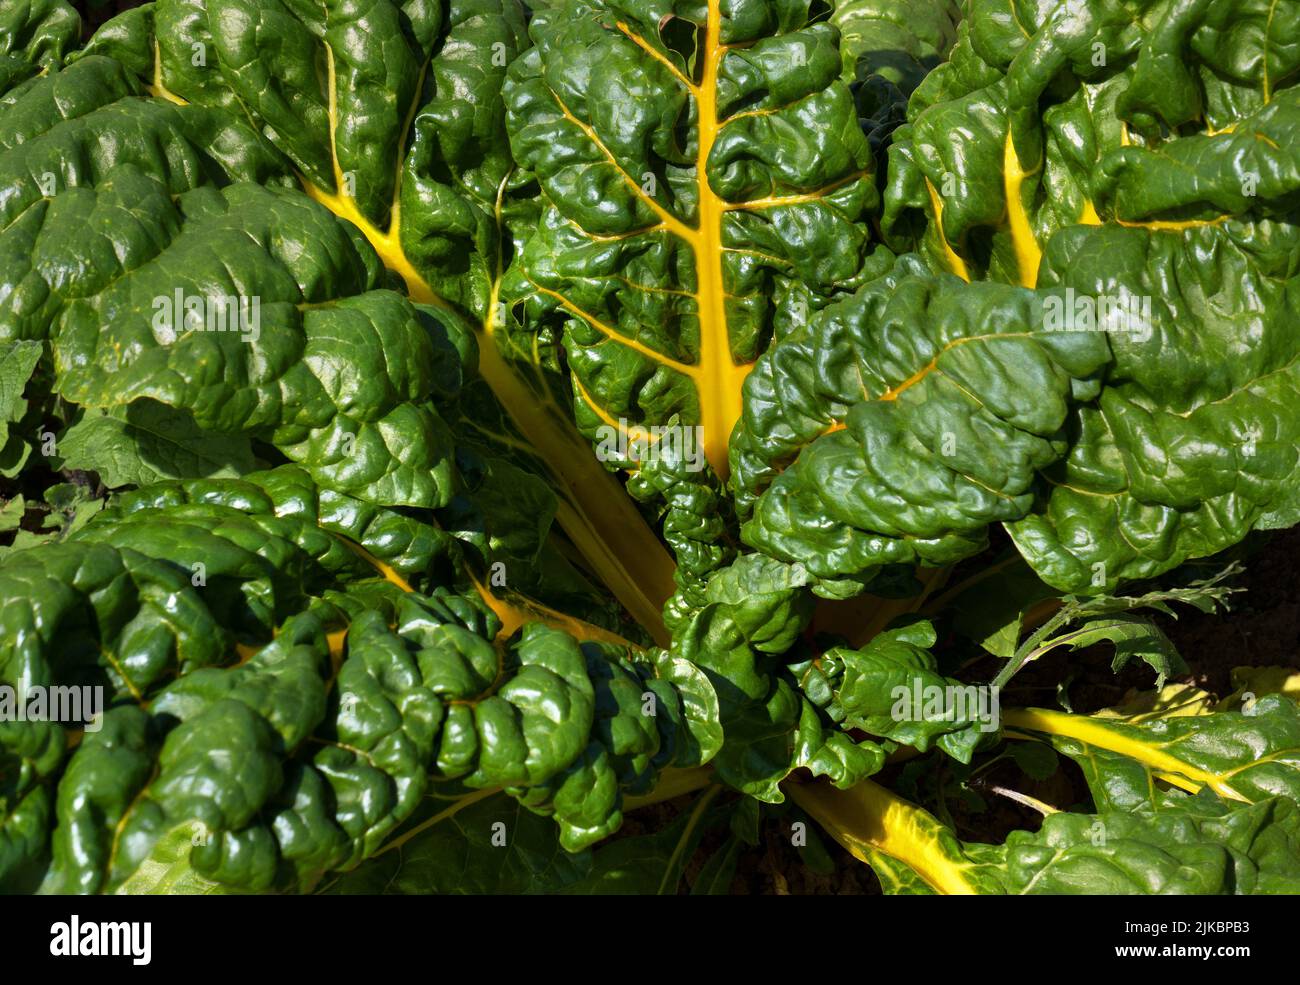 Swiss chard plant with yellow stems in close-up Stock Photo